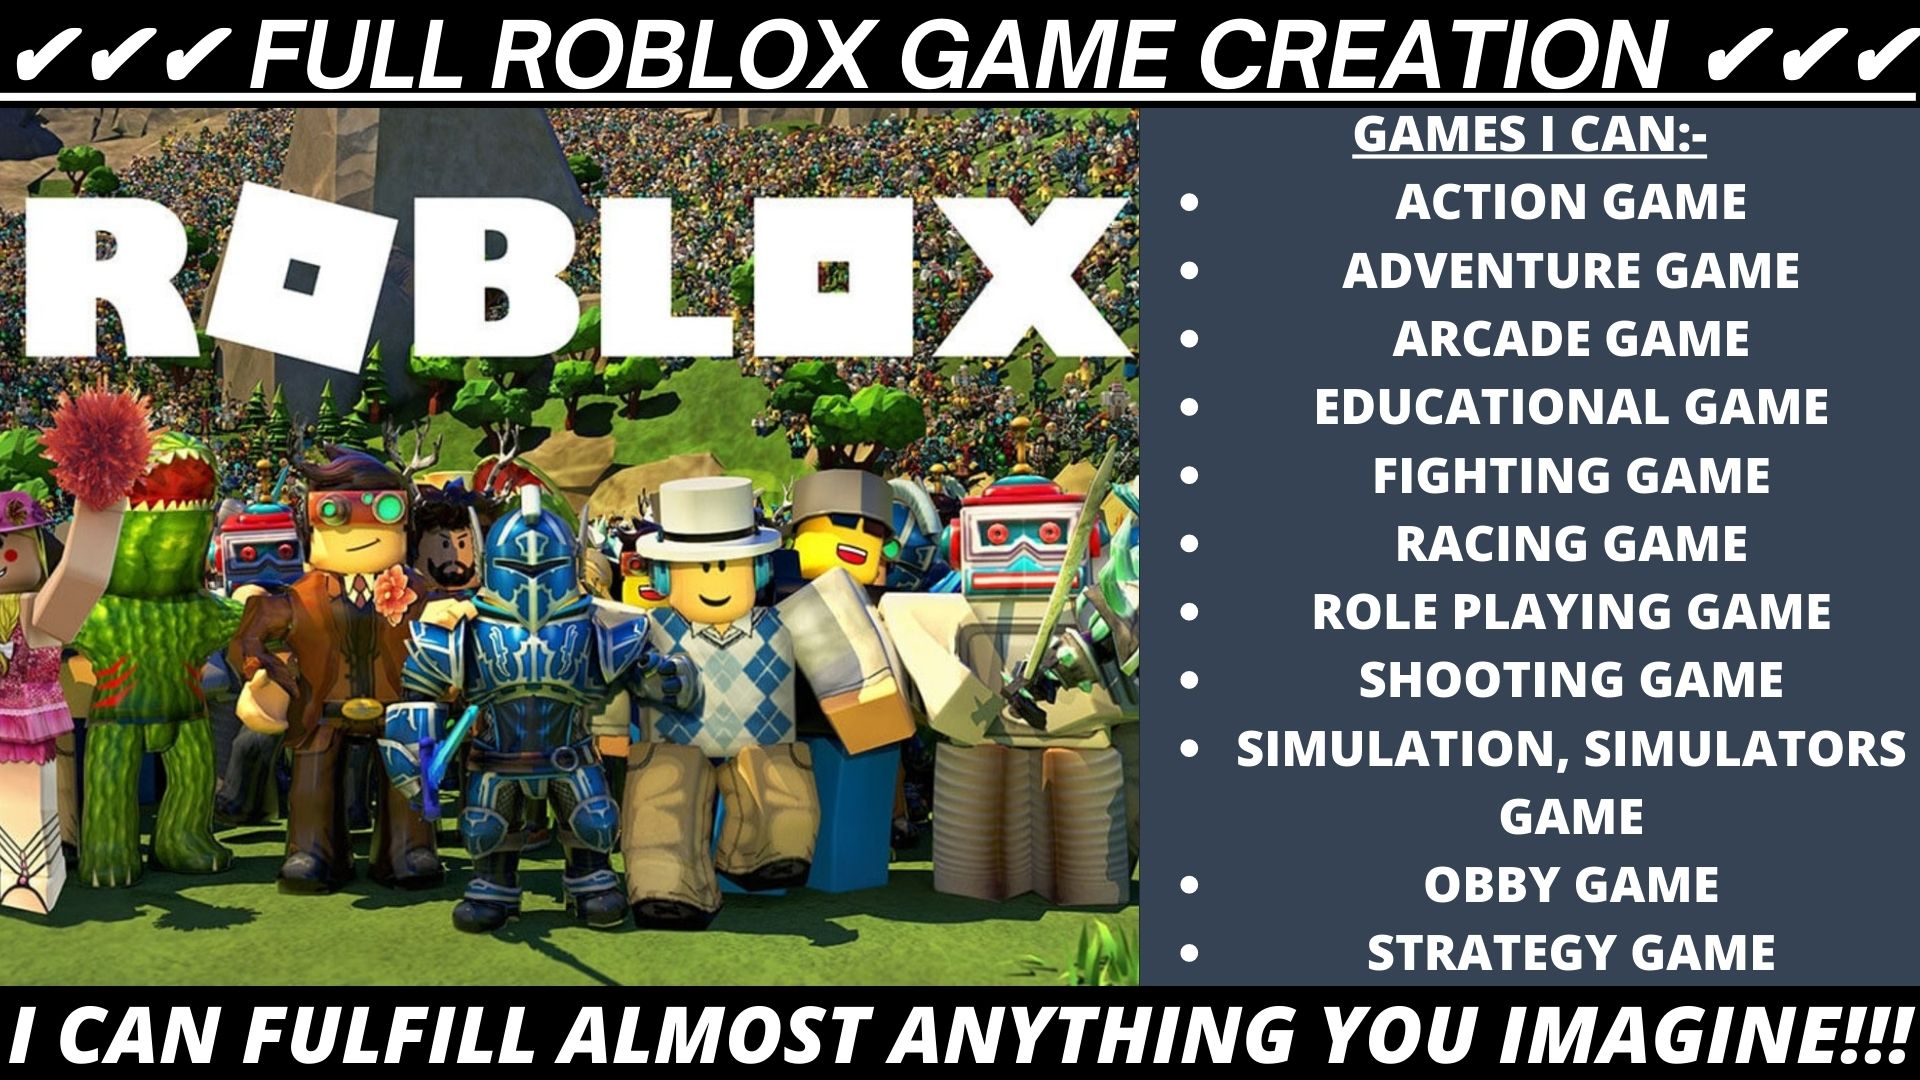 Unofficial Game Guide Roblox, Unblocked, Strategy, Mods, Tips And Tricks,  Strategy, Cheats: Unofficial Game Guide Roblox, Unblocked, Strategy, Mods,  Tips, Strategy, Cheats by robll kam